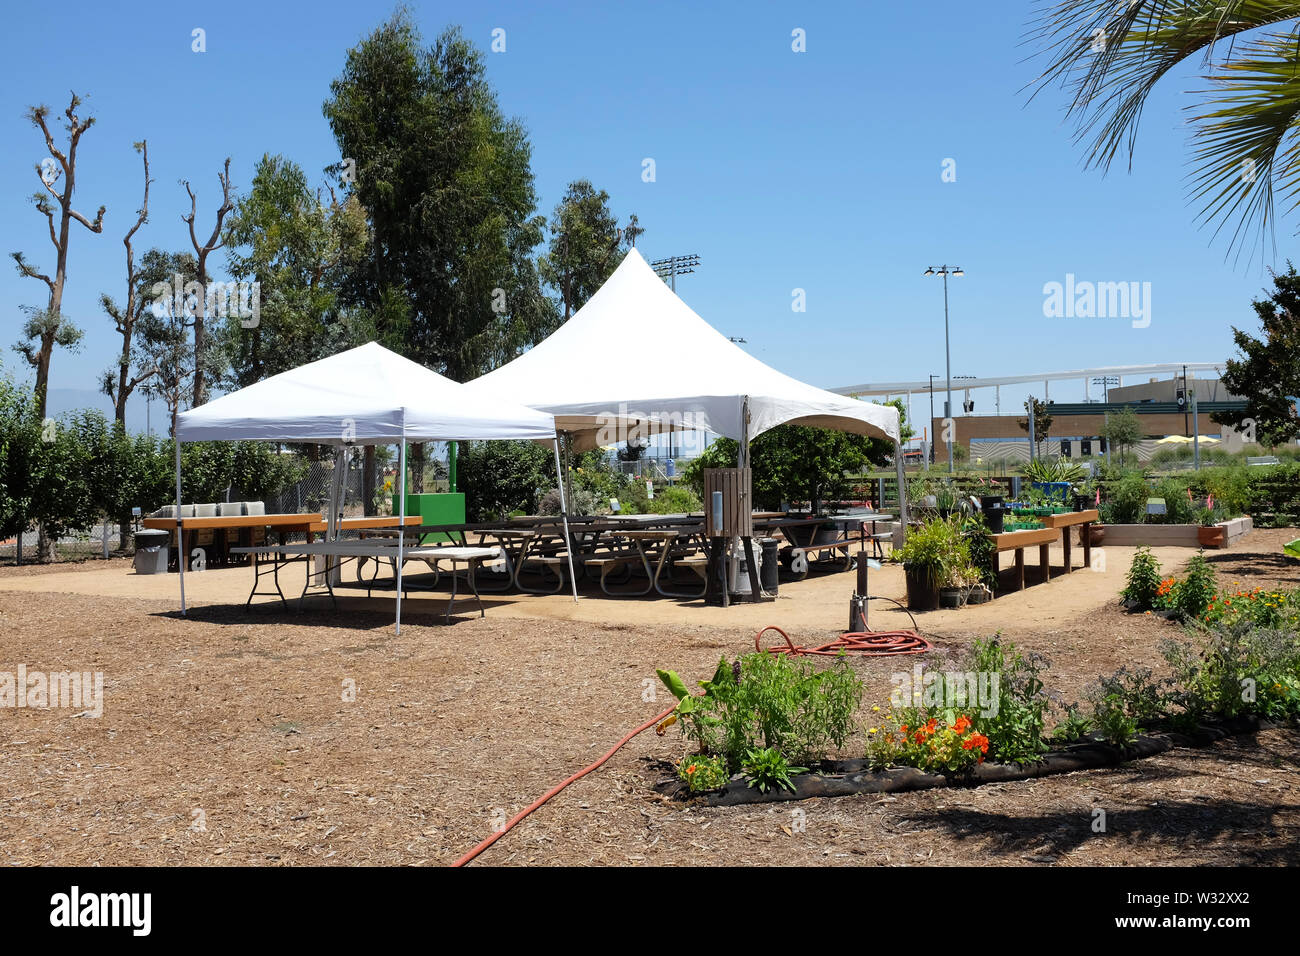 IRIVNE, CALIFORNIA - JULY 11, 2019: Great Park Farm and Food Lab. A one acre plot in Irvine's Great Park established as a demonstration of sustainable Stock Photo